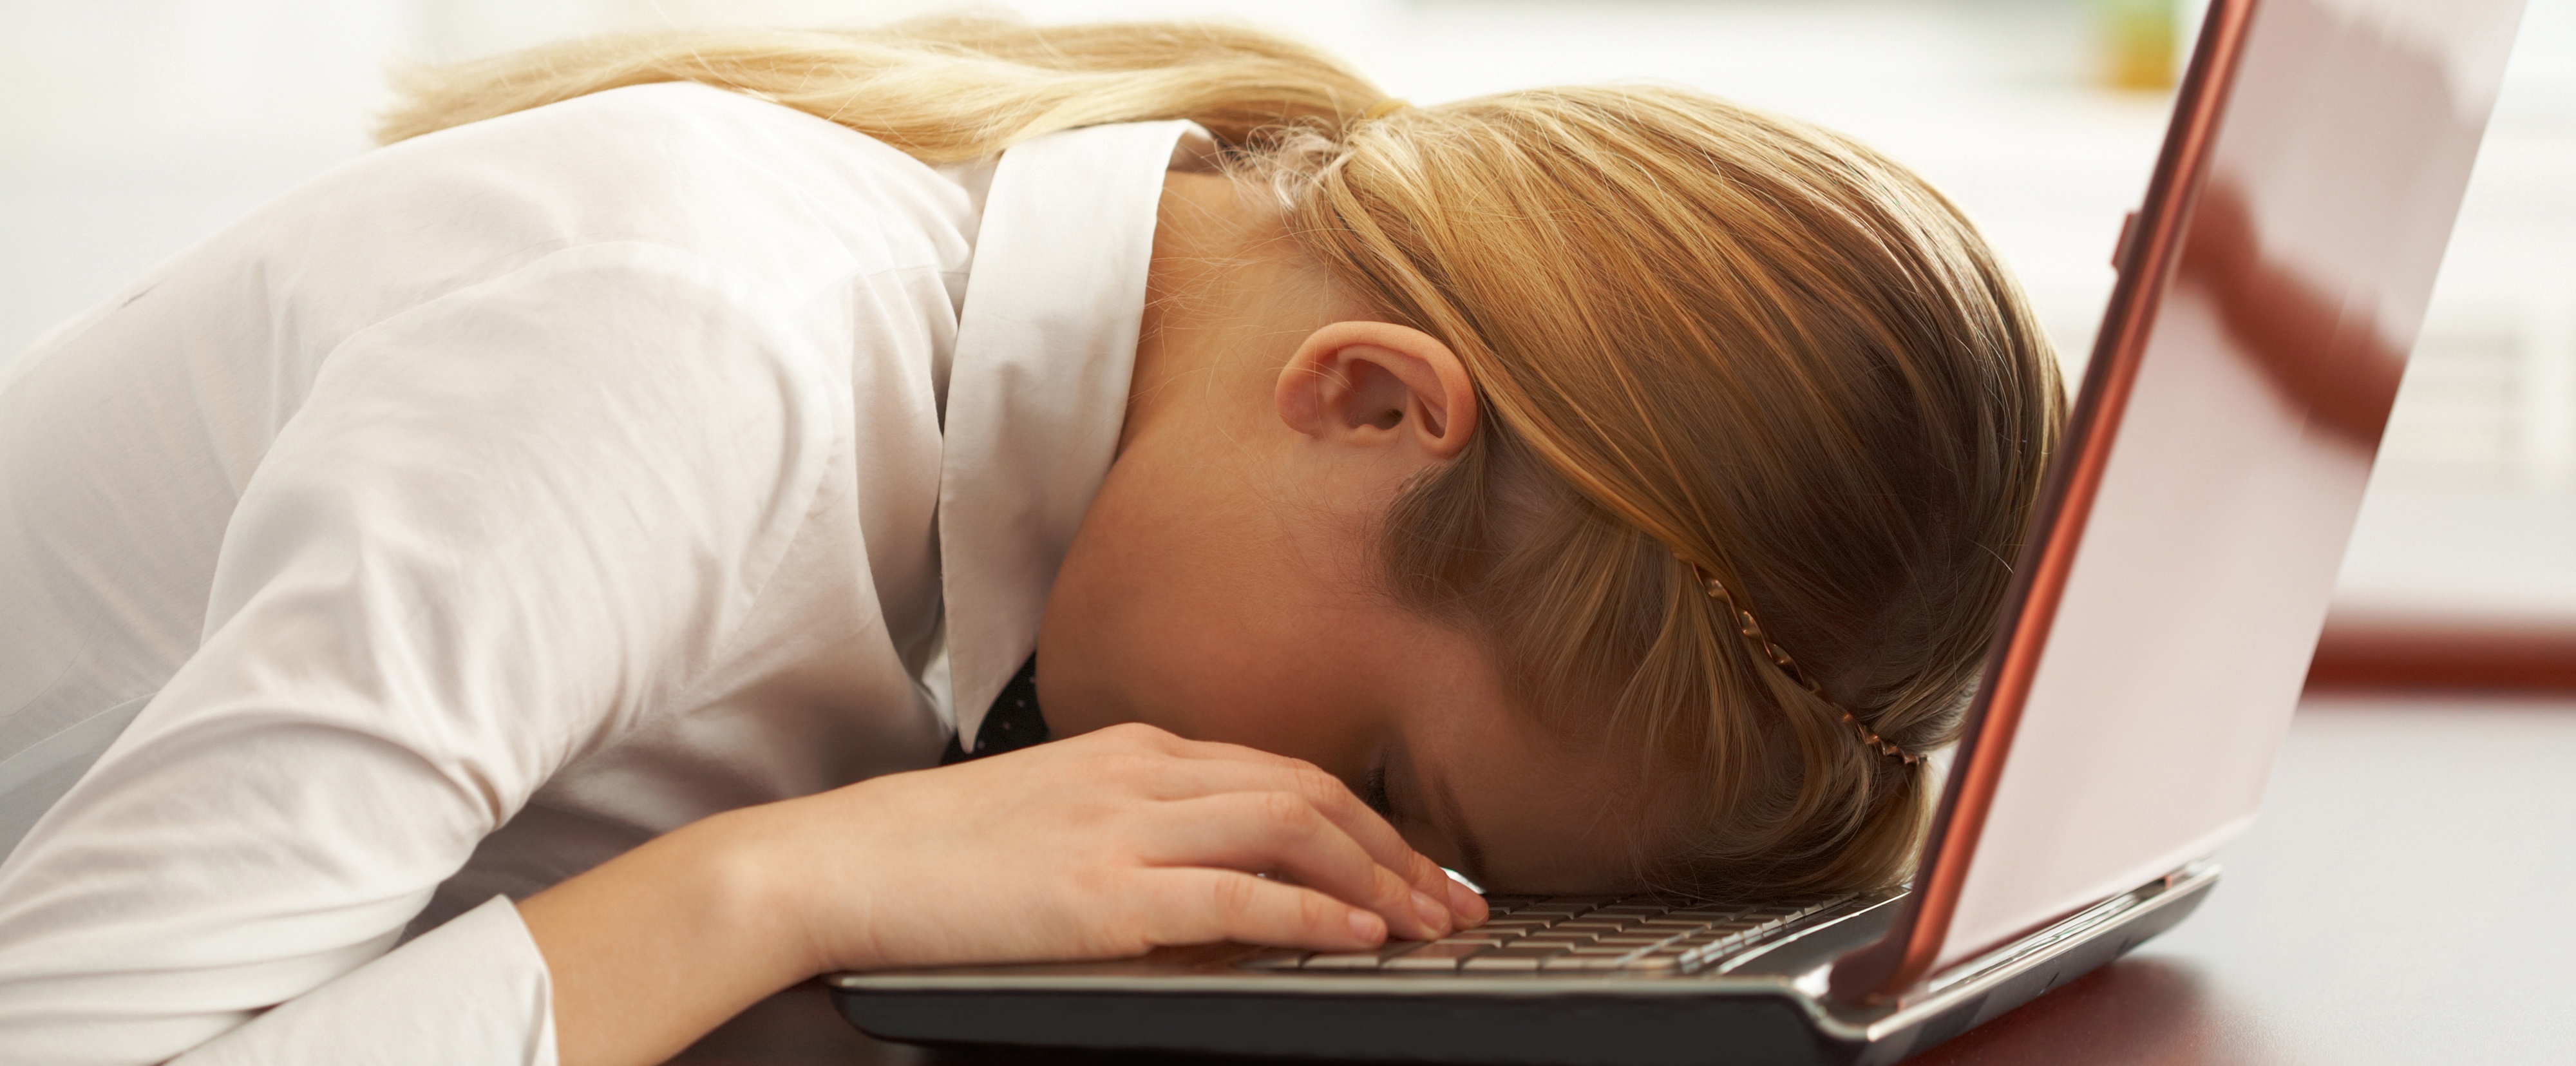 Are You Exhausting Your Buyer? 4 Signs of Decision Fatigue & How to Beat It